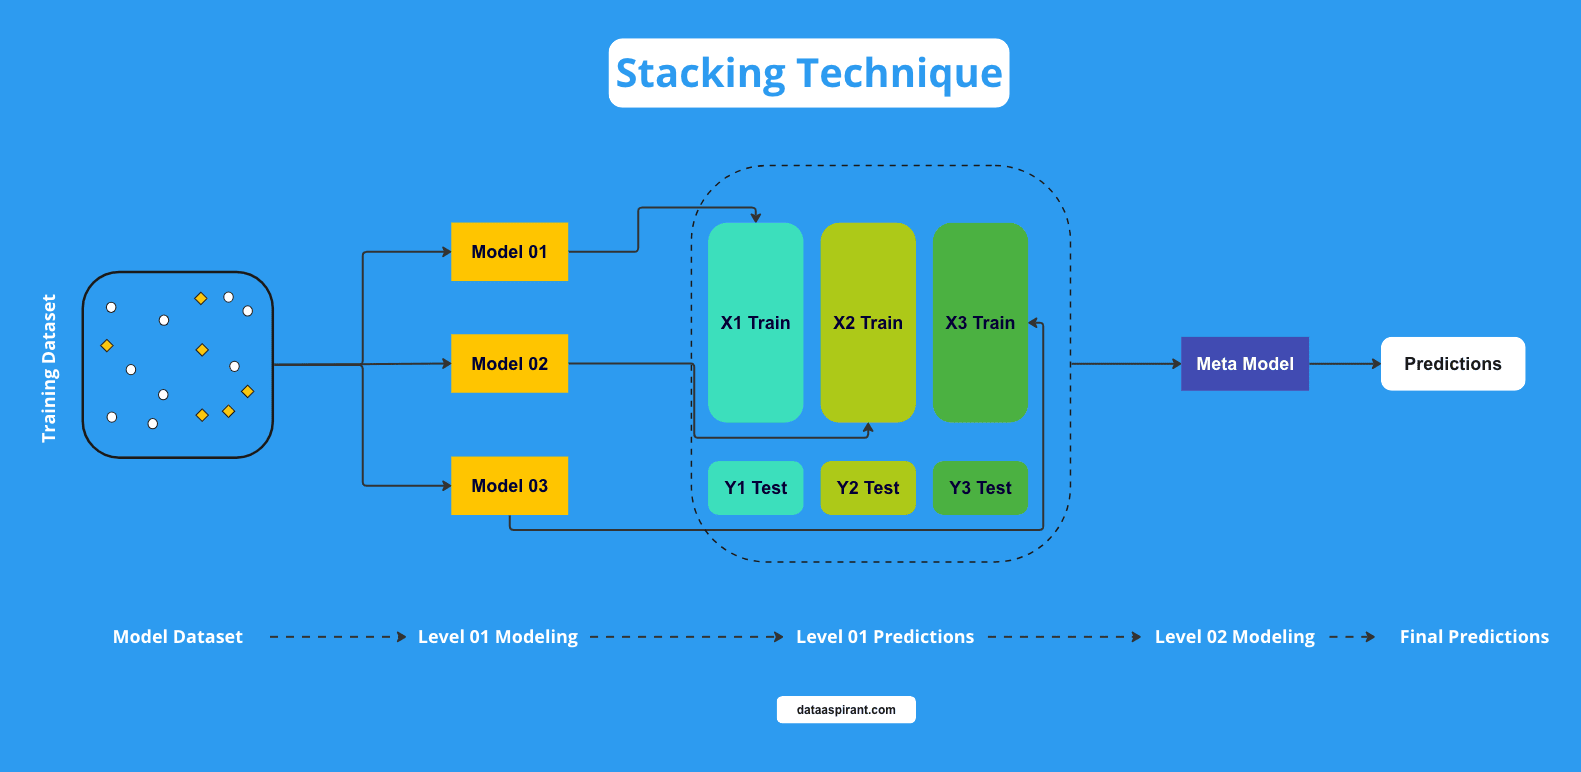 How Stacking Technique Work?